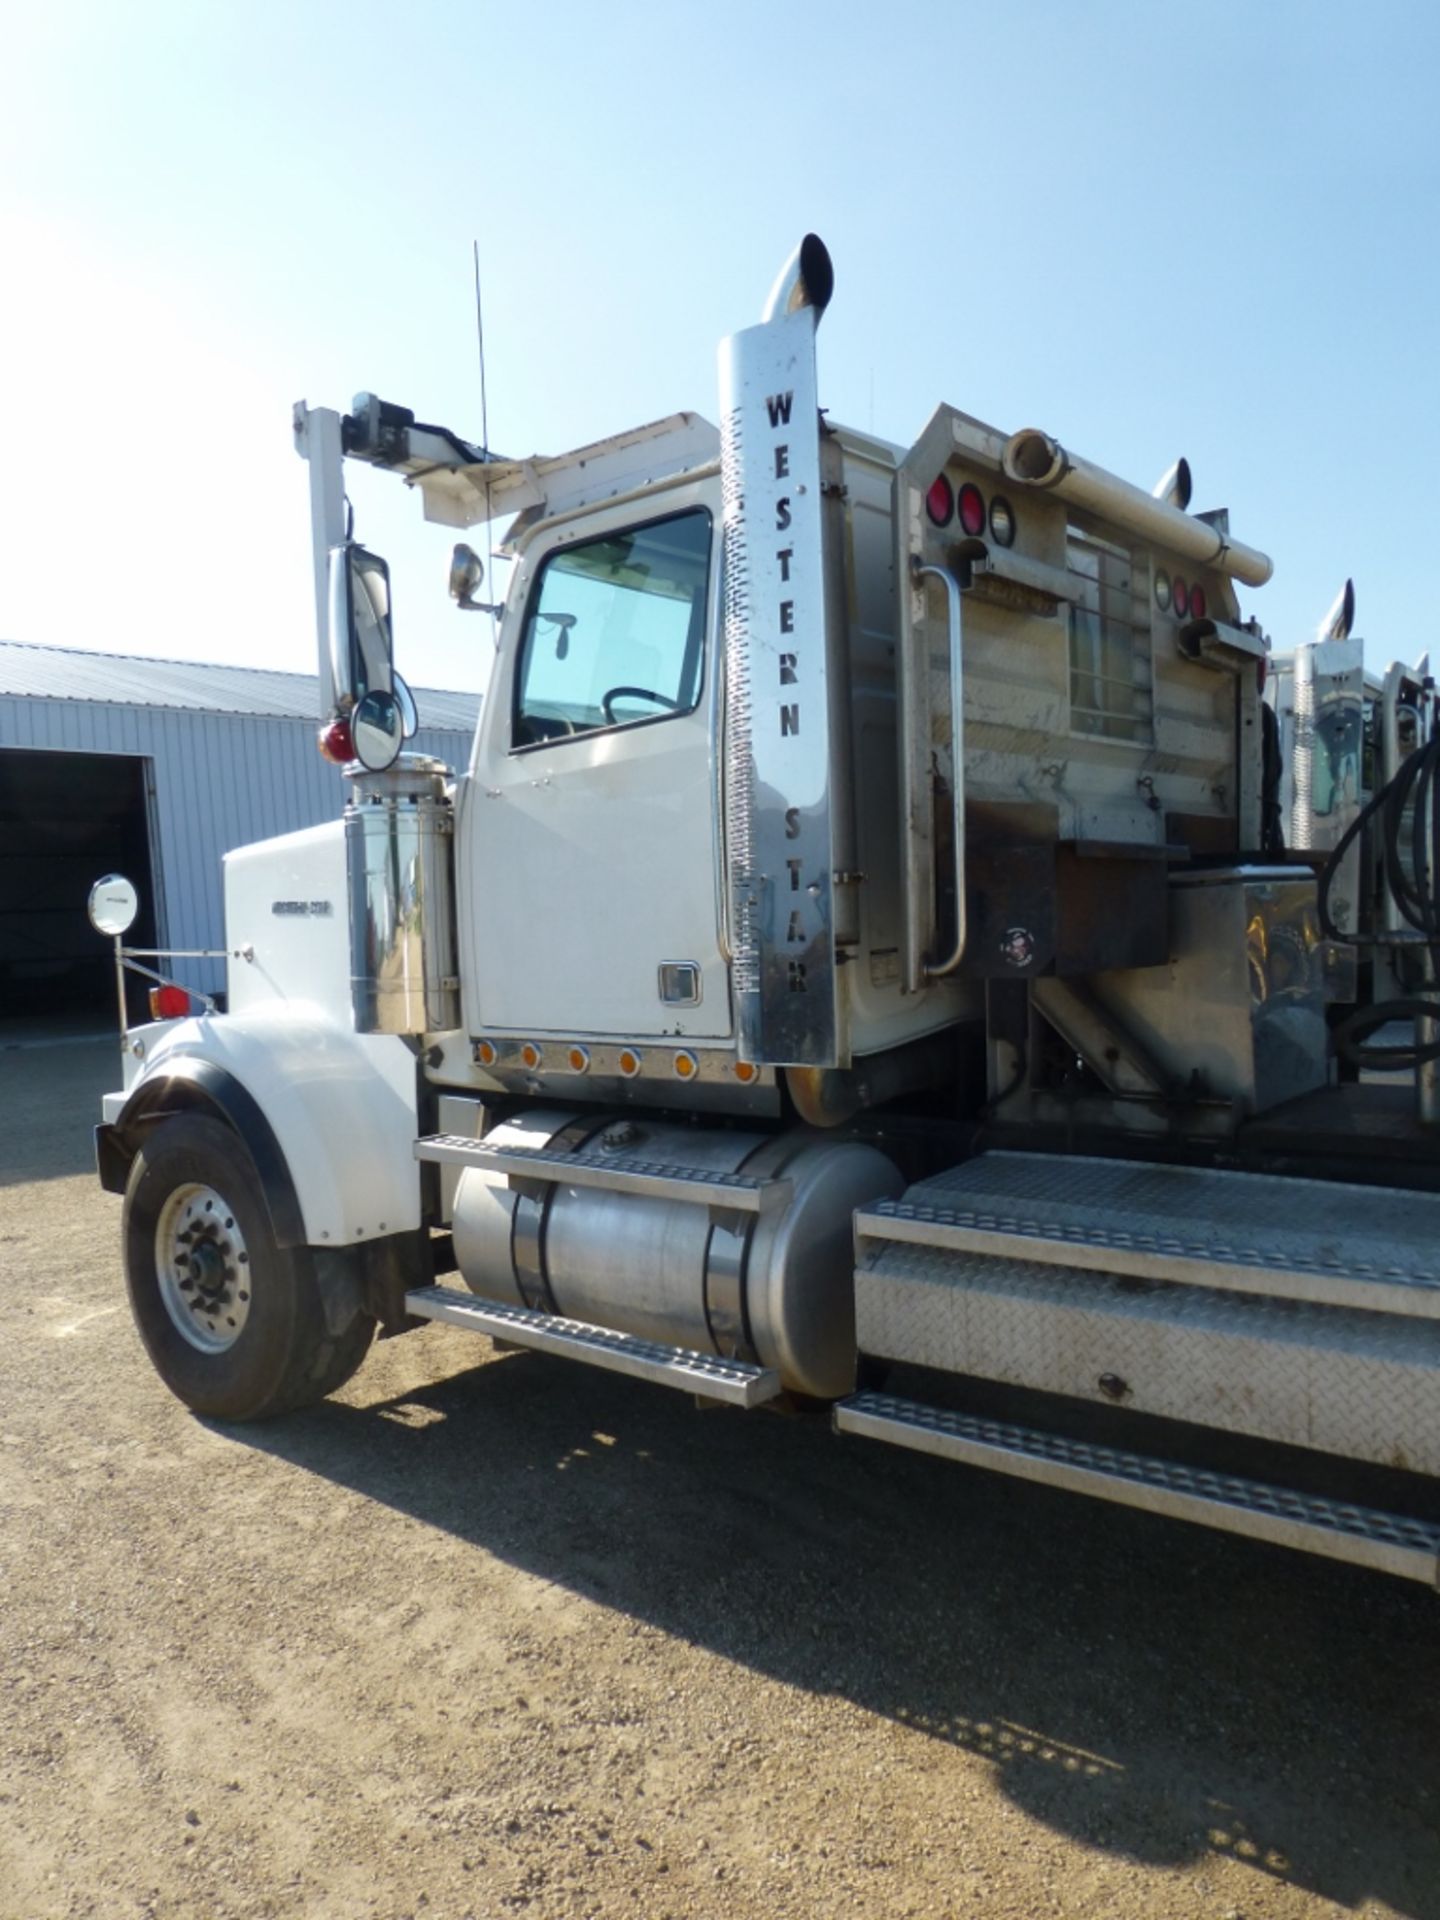 2006 Freightliner Western Star 4900EX, Heavy Haul Day cab, 3 axle, Eaton Fuller H/L 18 spd trans, - Image 7 of 26